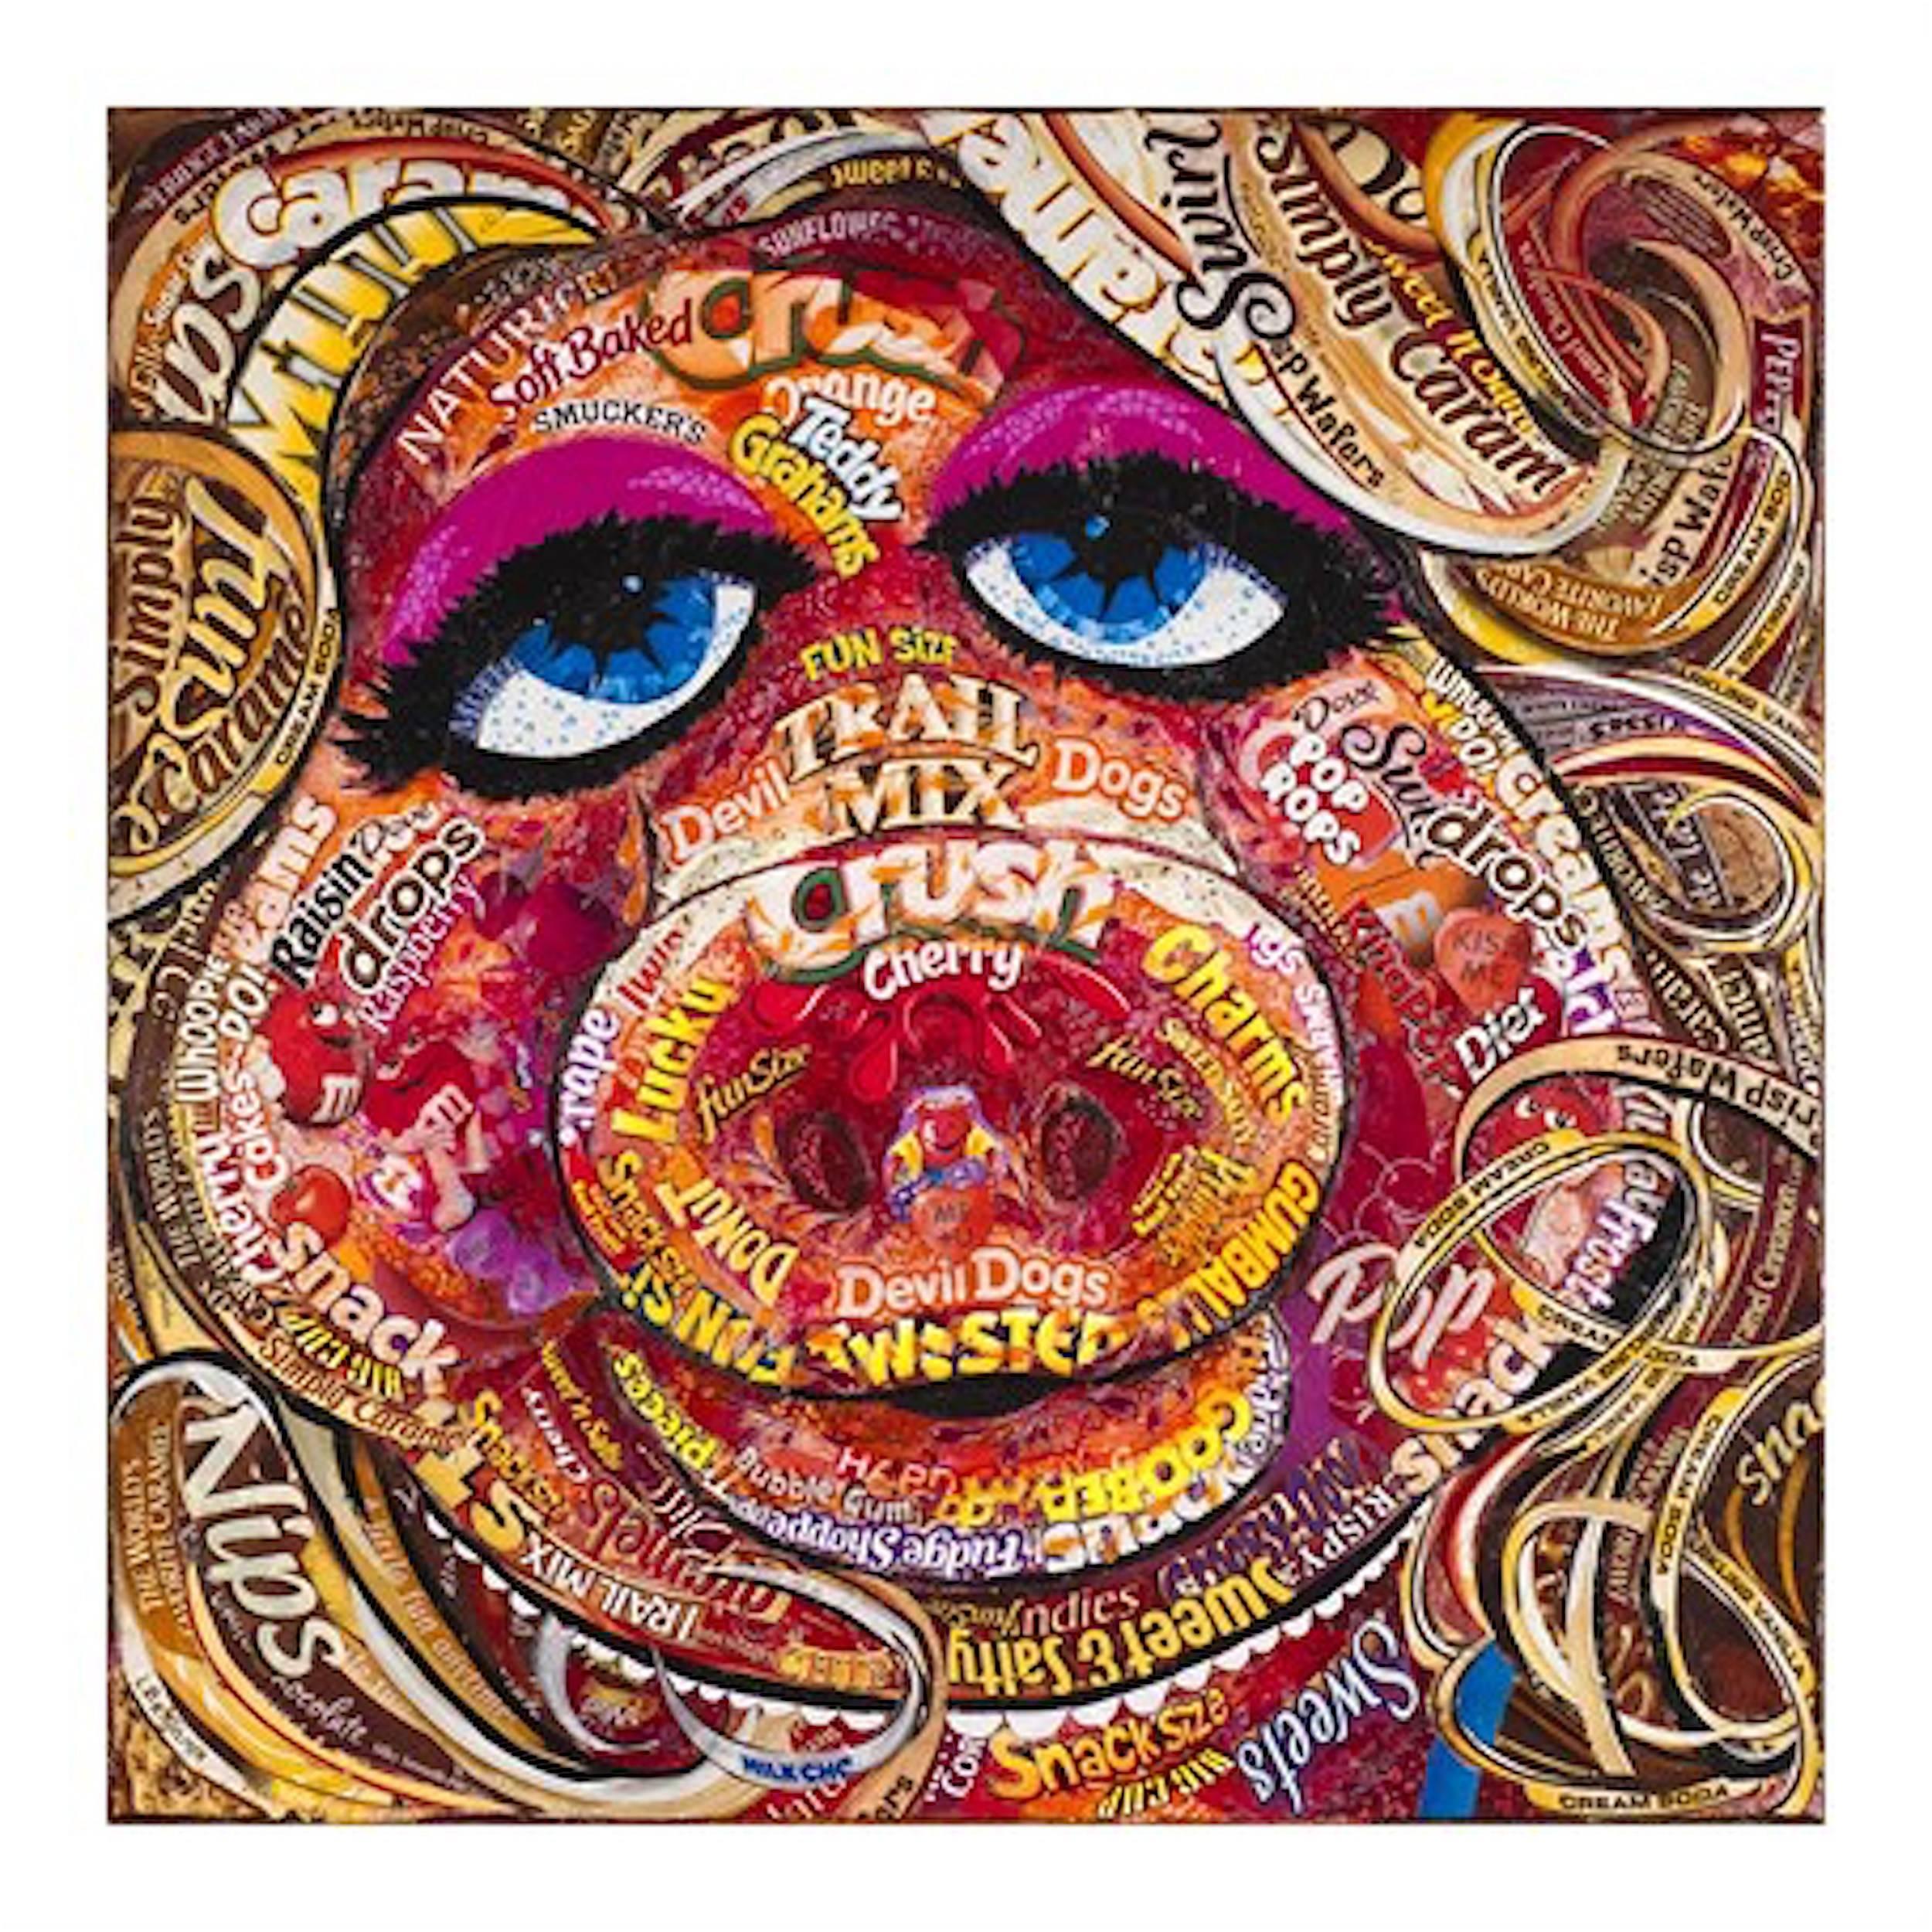 Miss Piggy - Original - Part of Candy Wrapper Collage Series